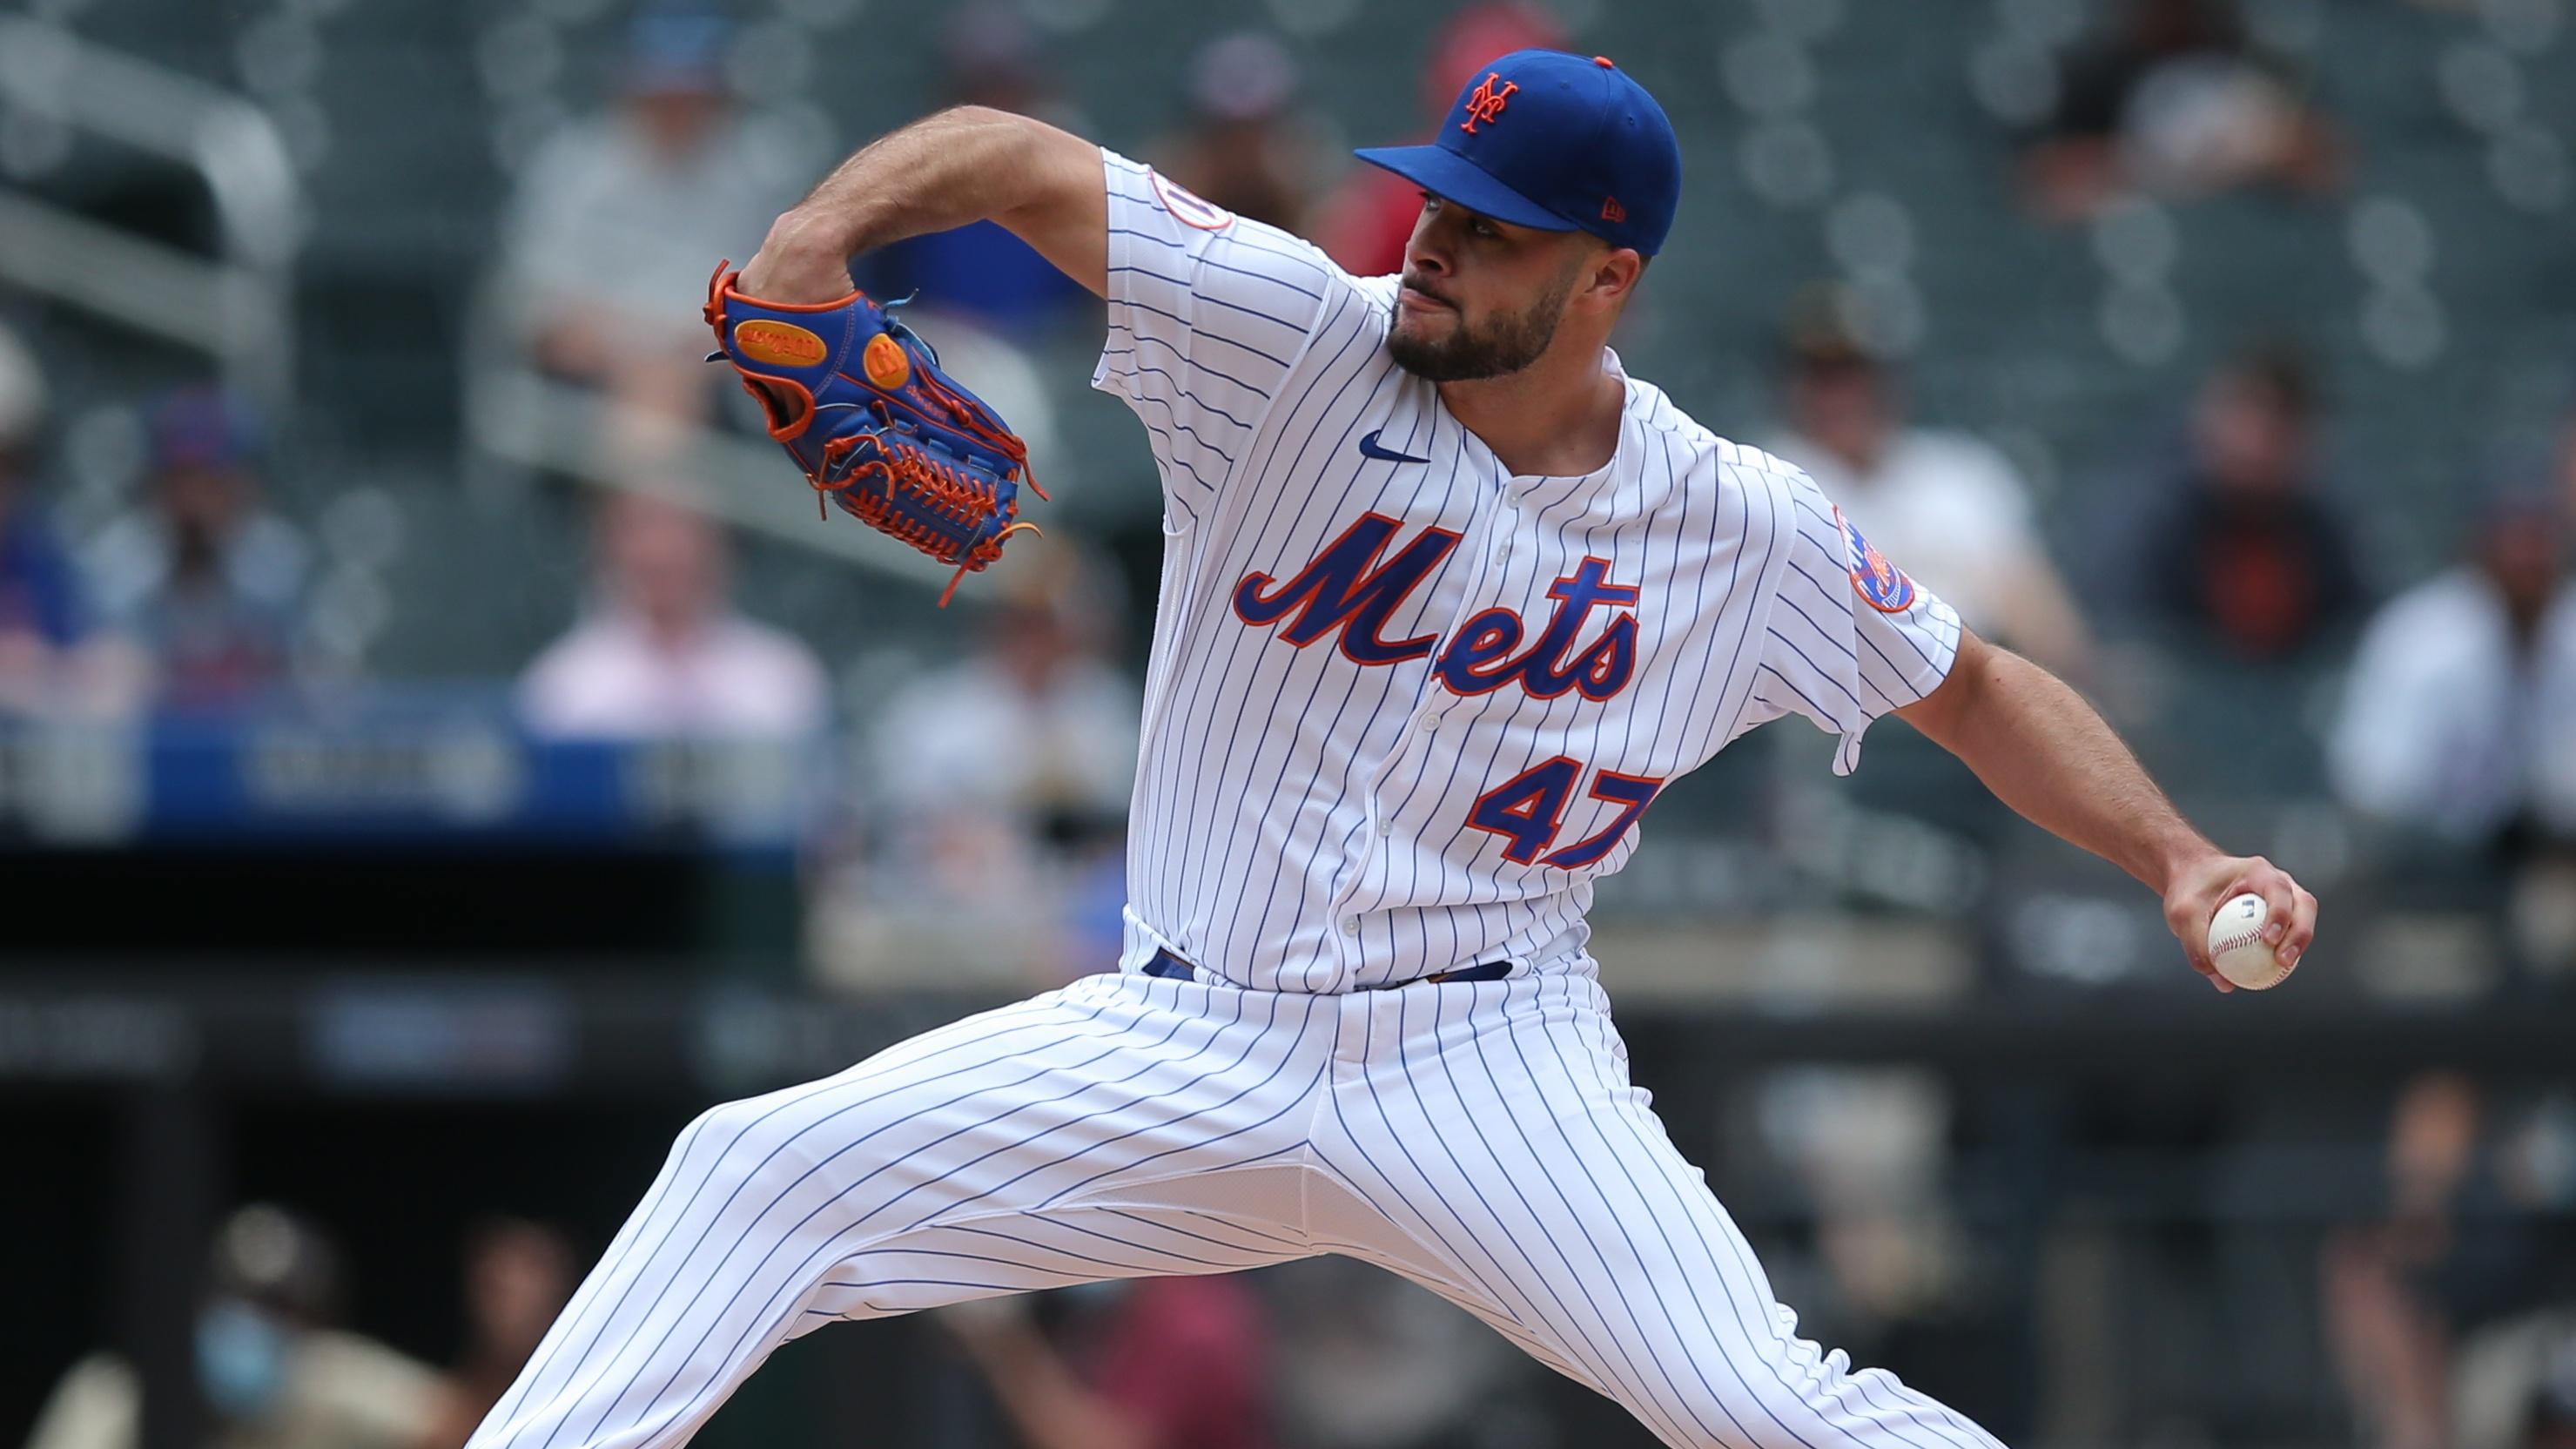 Jun 13, 2021; New York City, New York, USA; New York Mets starting pitcher Joey Lucchesi (47) pitches against the San Diego Padres during the first inning at Citi Field. / © Brad Penner-USA TODAY Sports